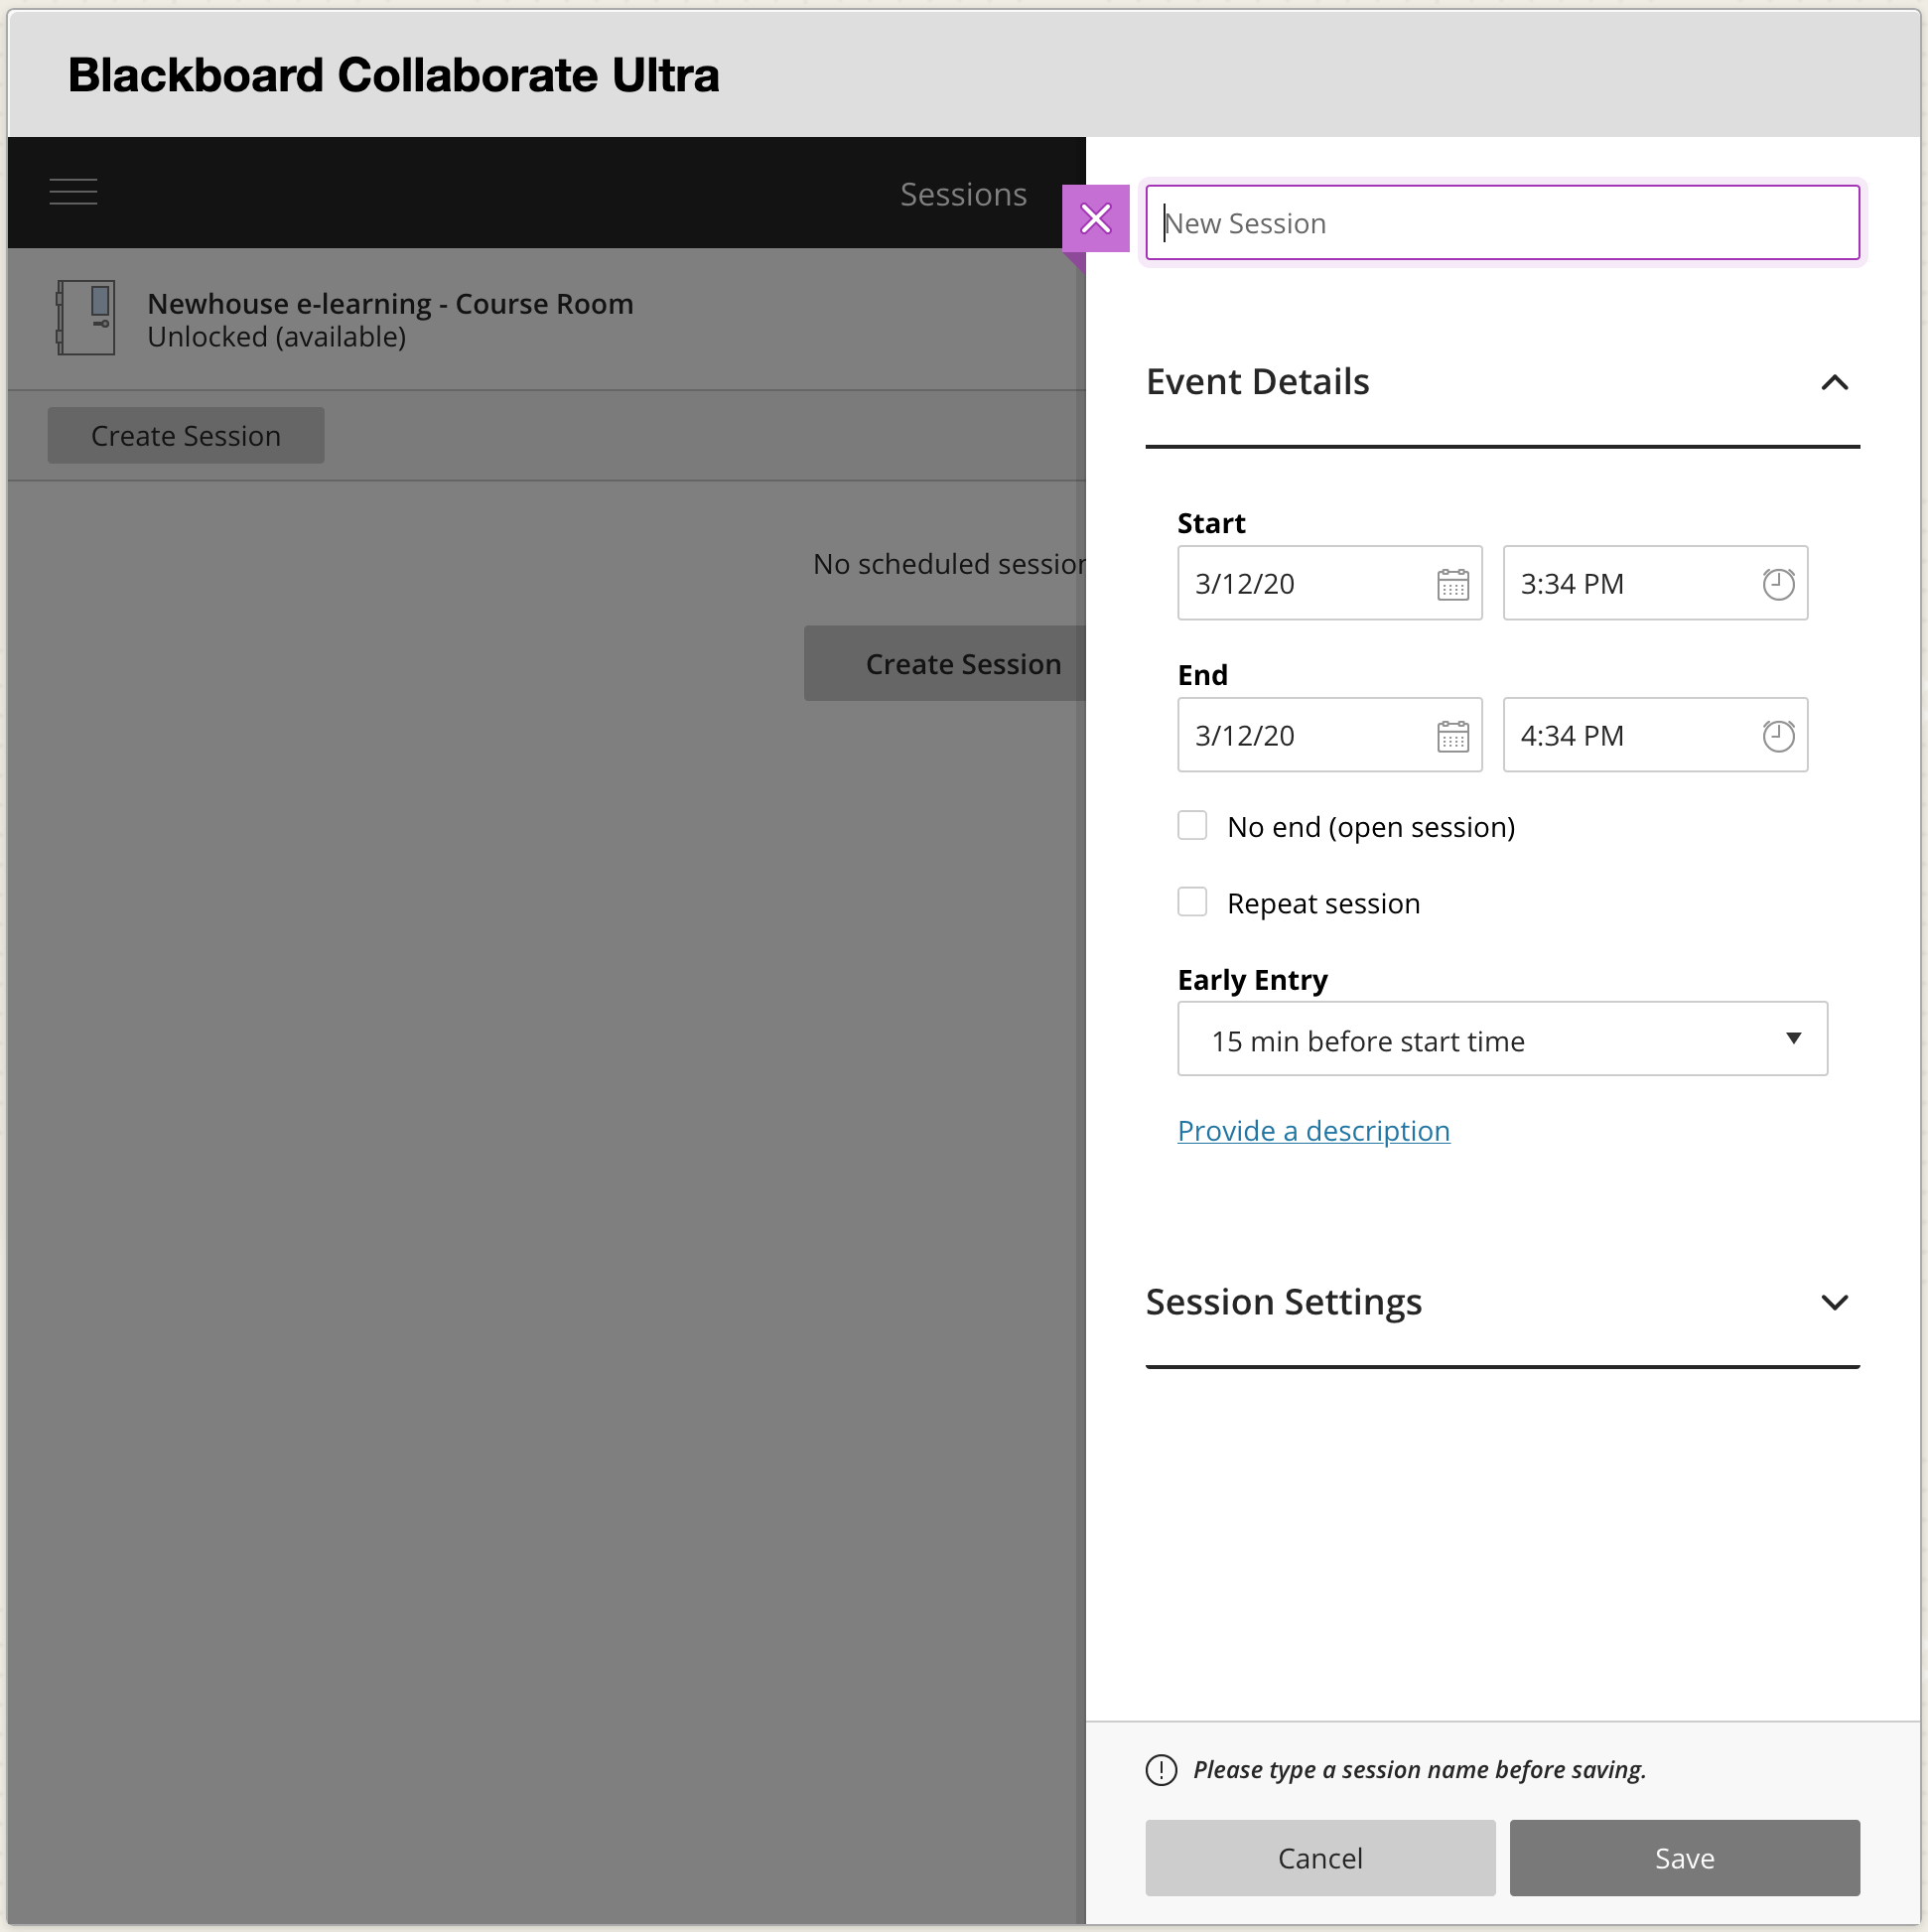 New Session sidebar open on right side of blackboard collaborate Ultra page.